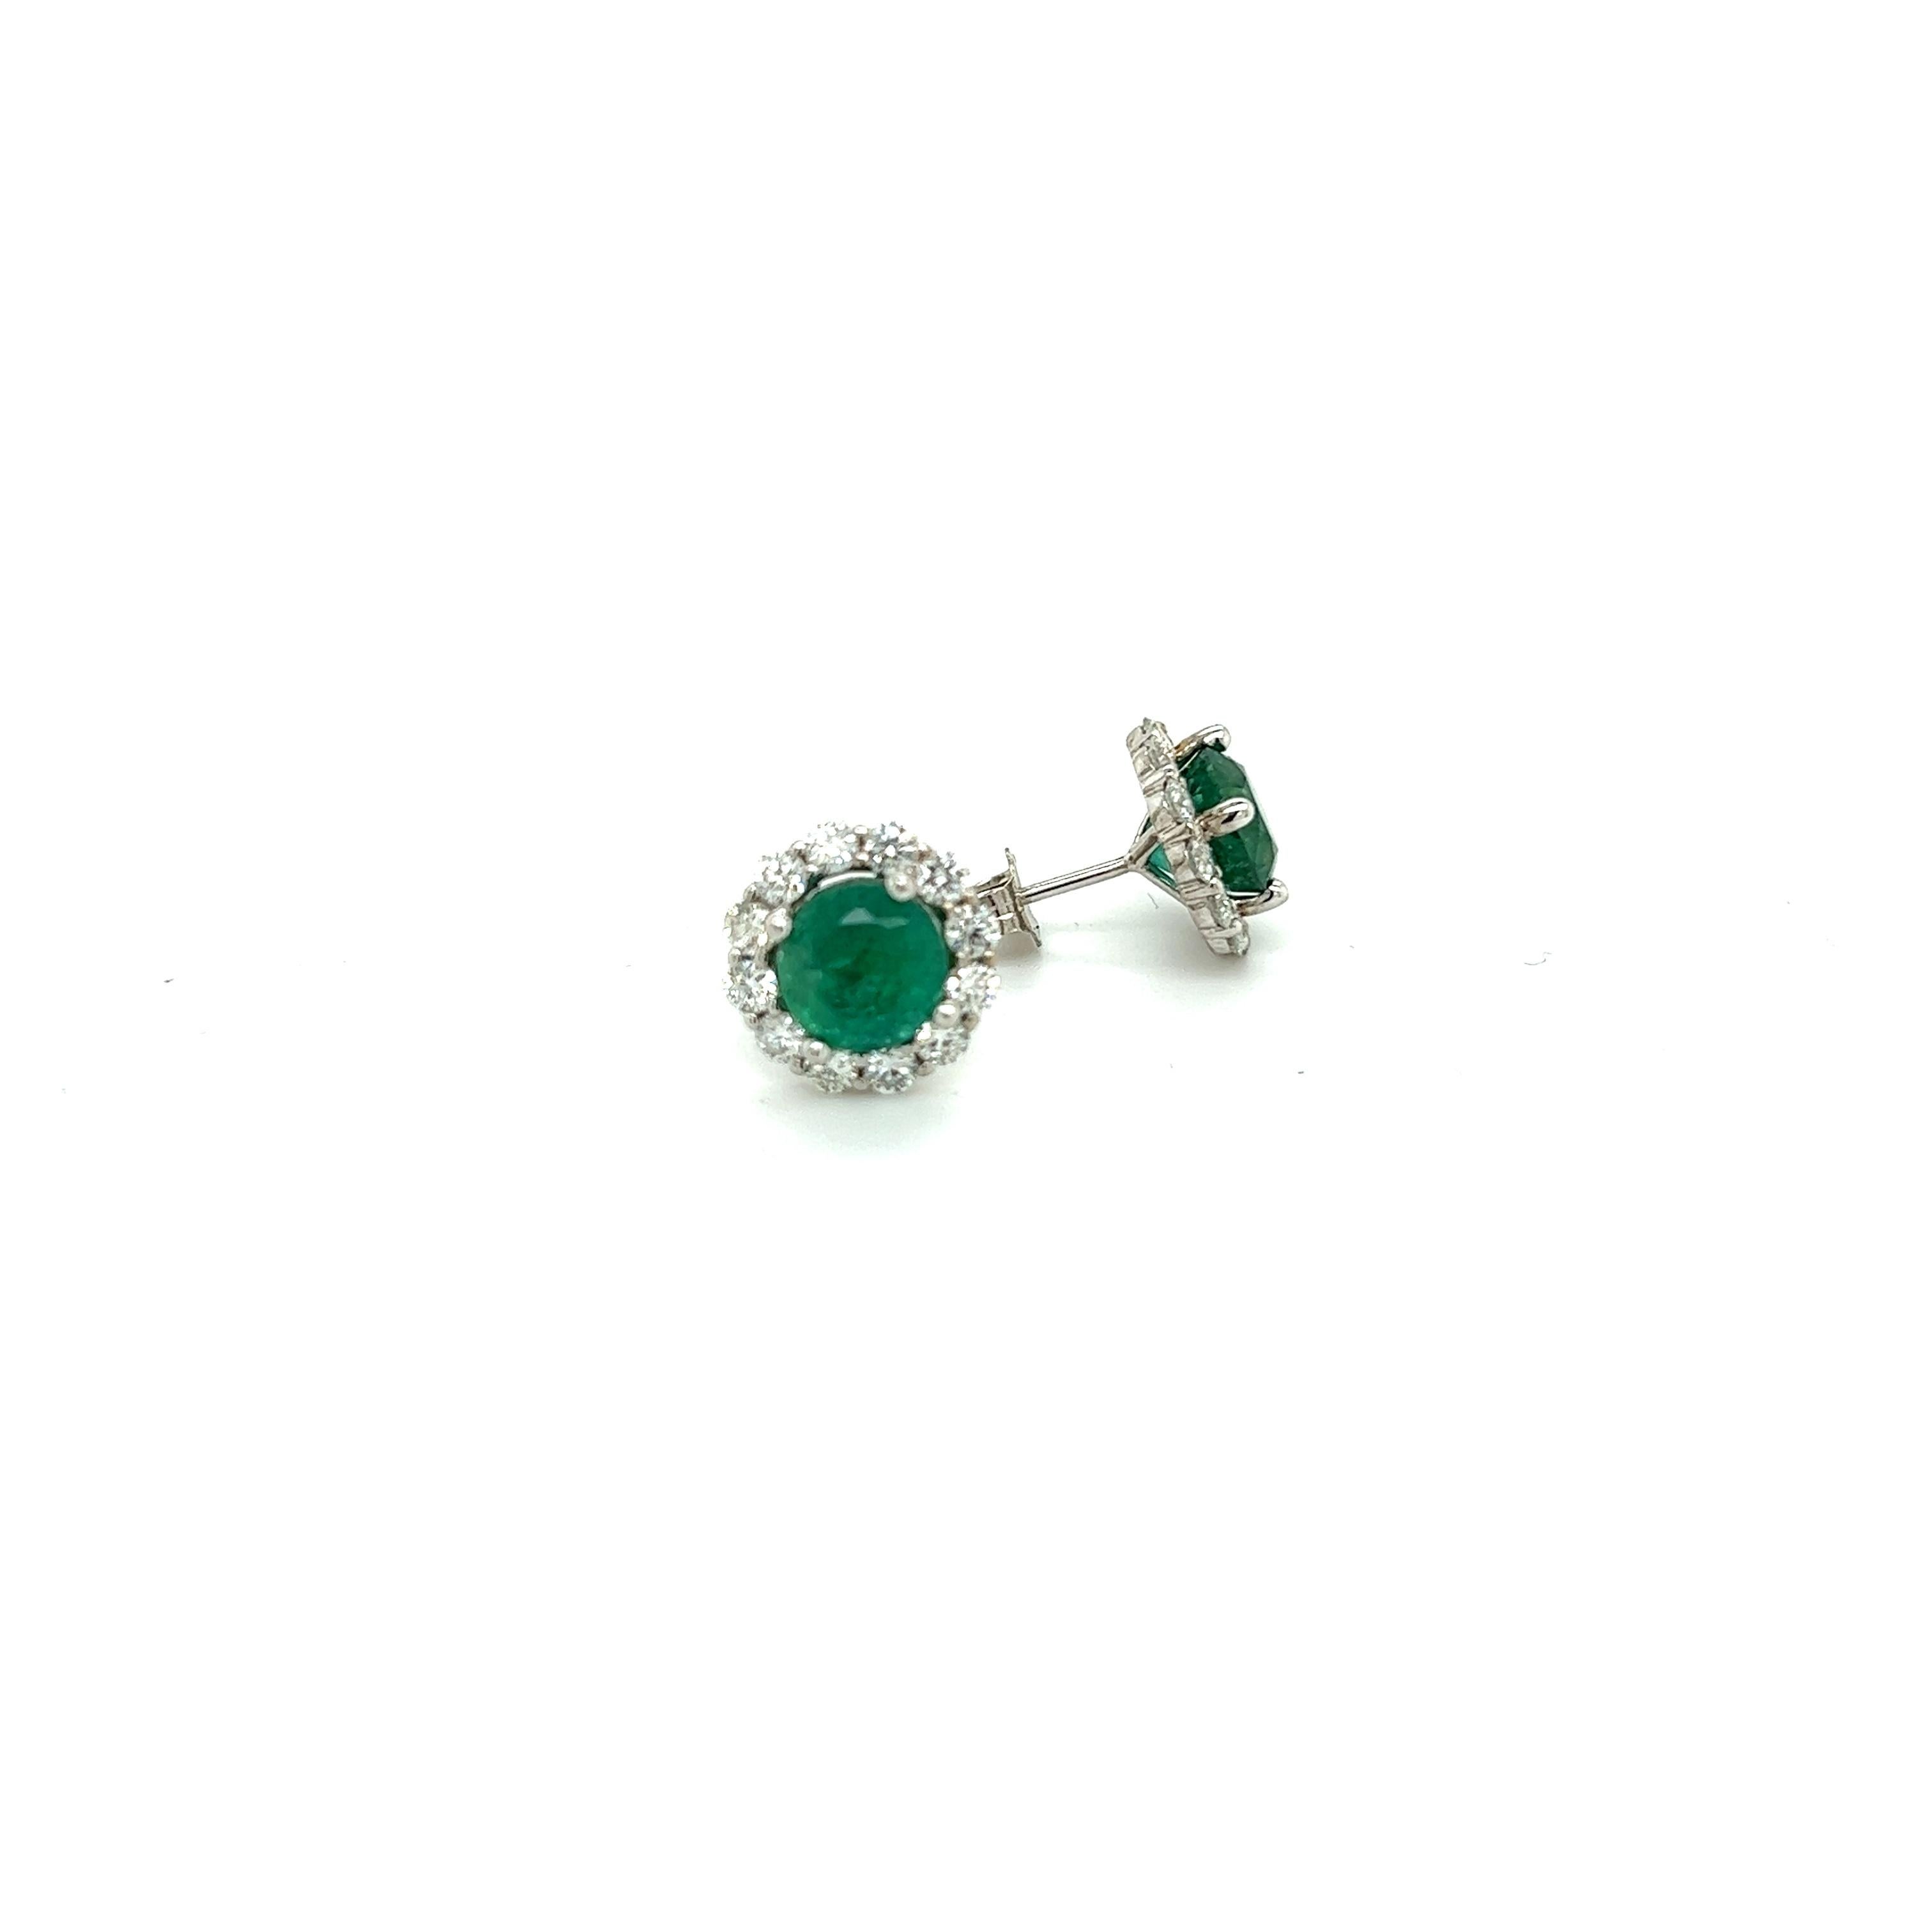 Natural Emerald Diamond Earrings 18k White Gold 3.8 TCW Certified For Sale 2